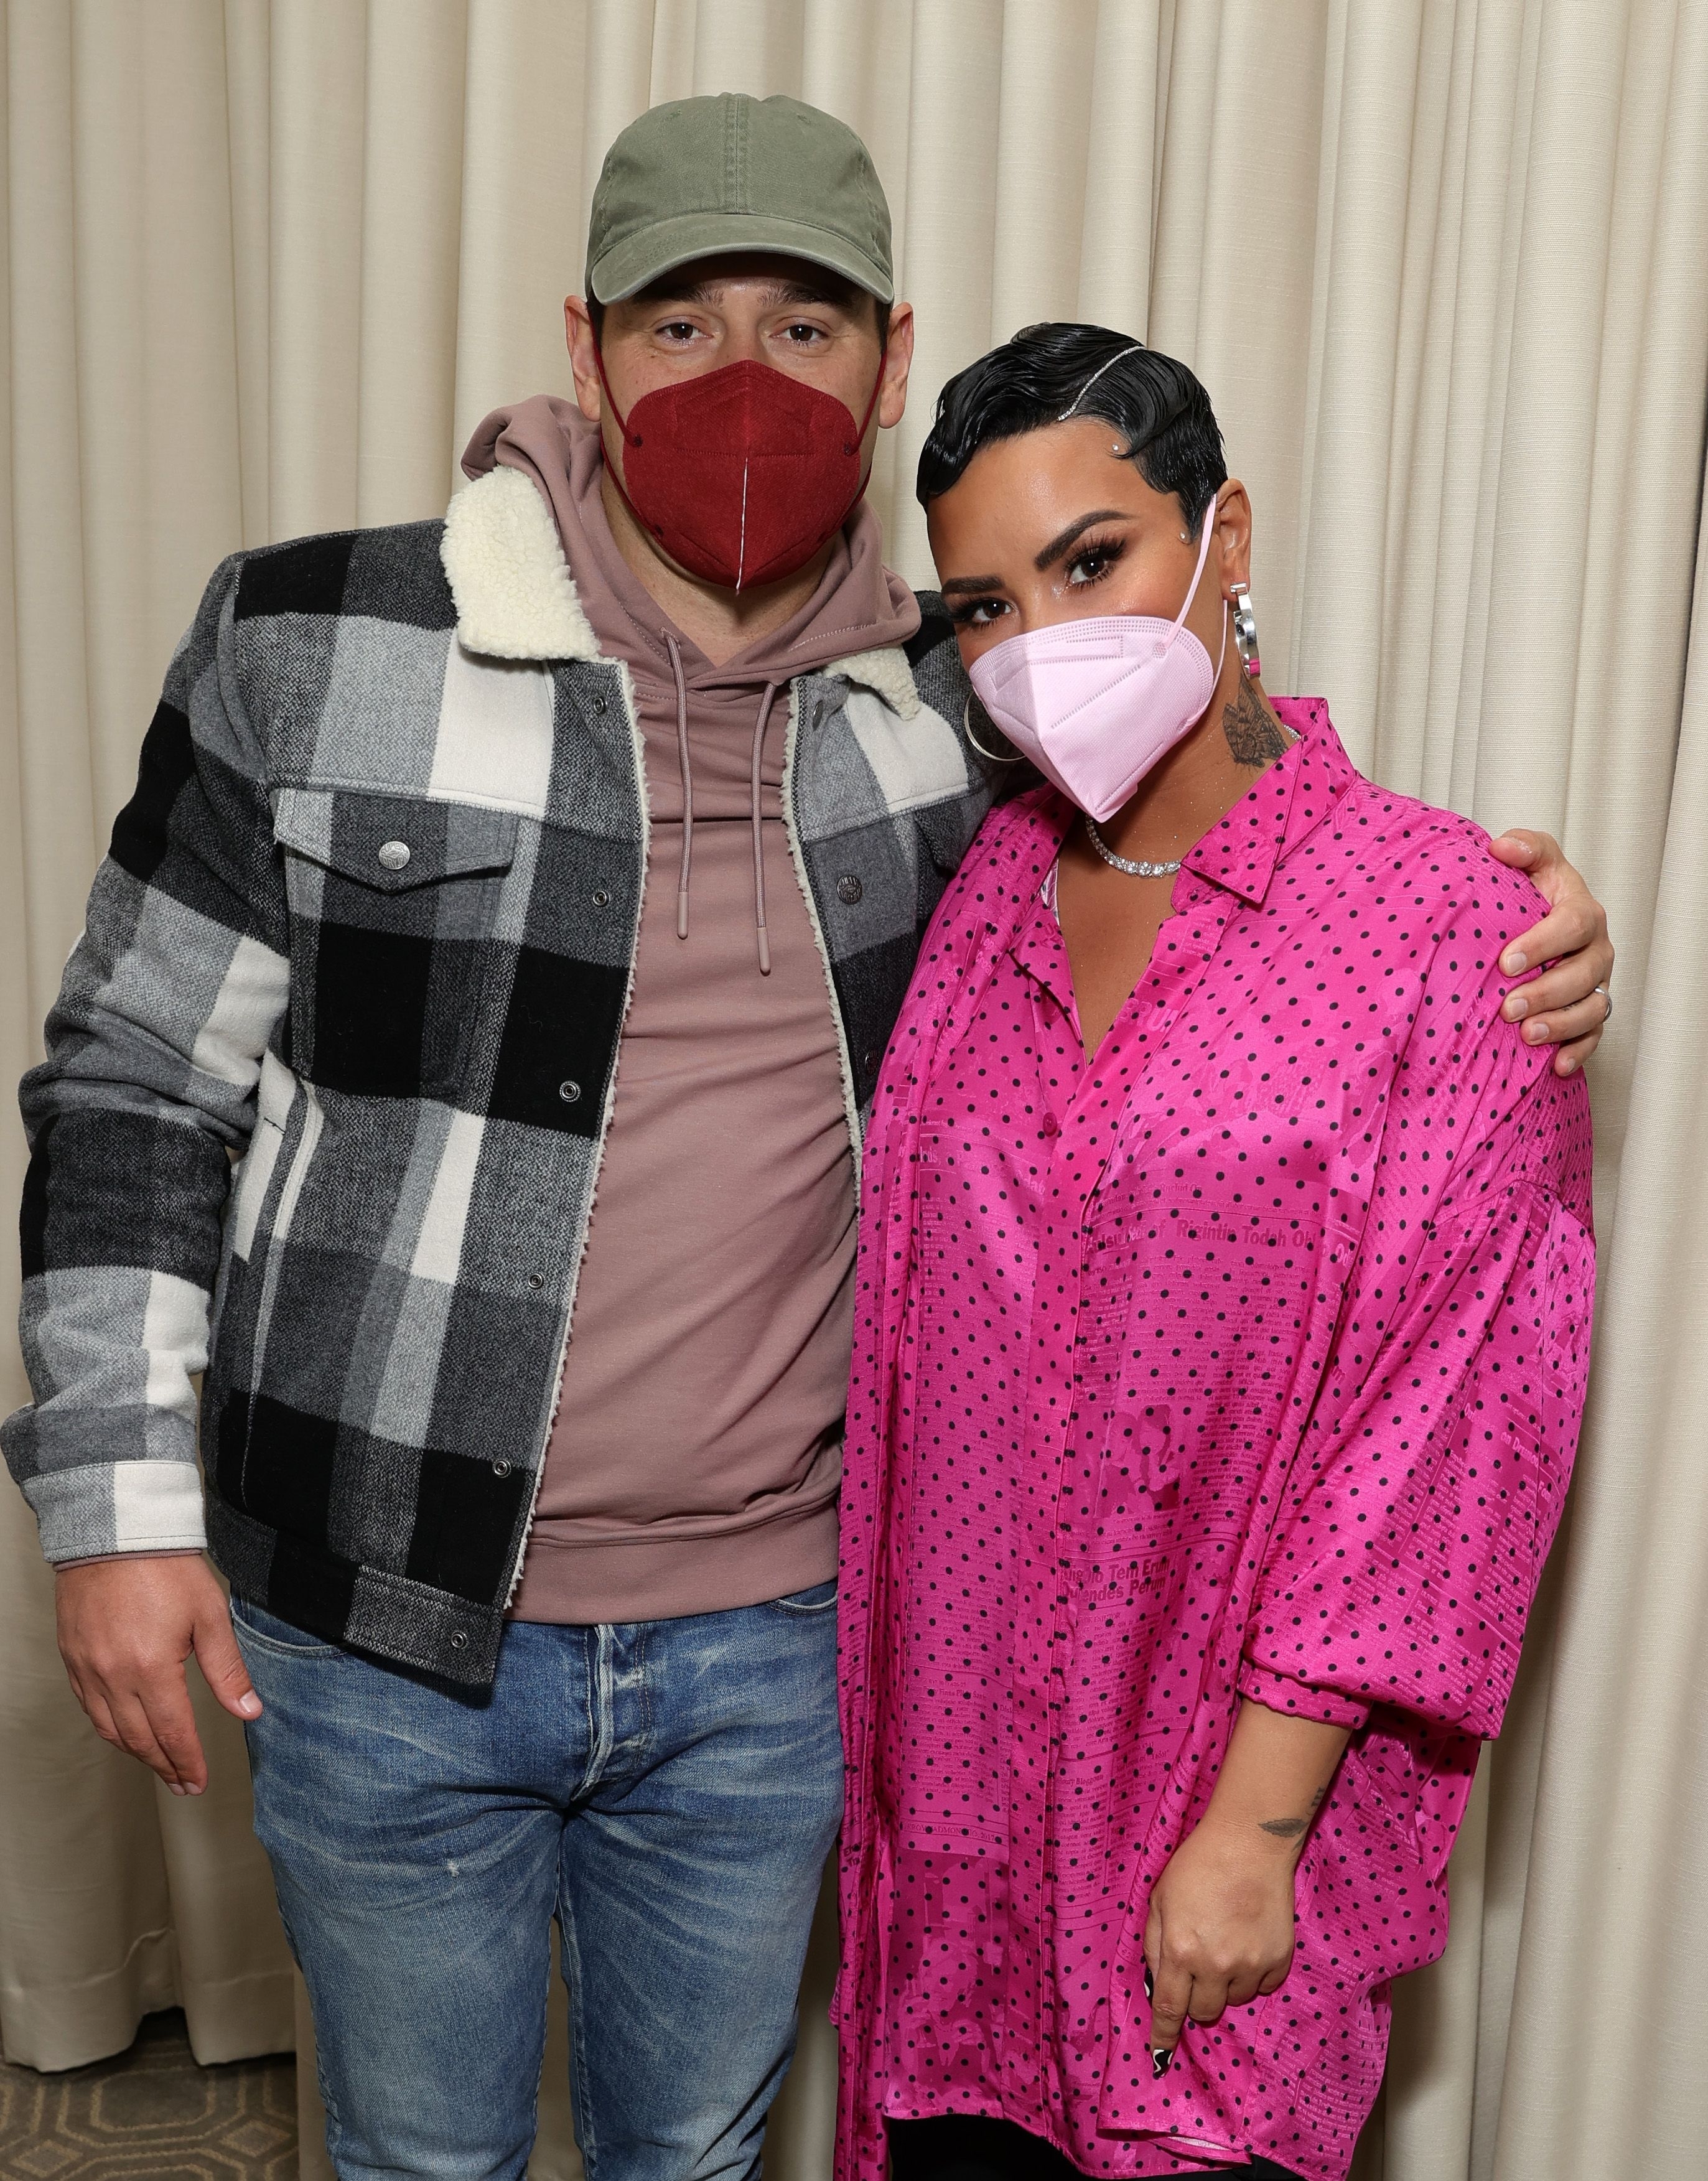 Scooter and Demi backstage at an event wearing face masks